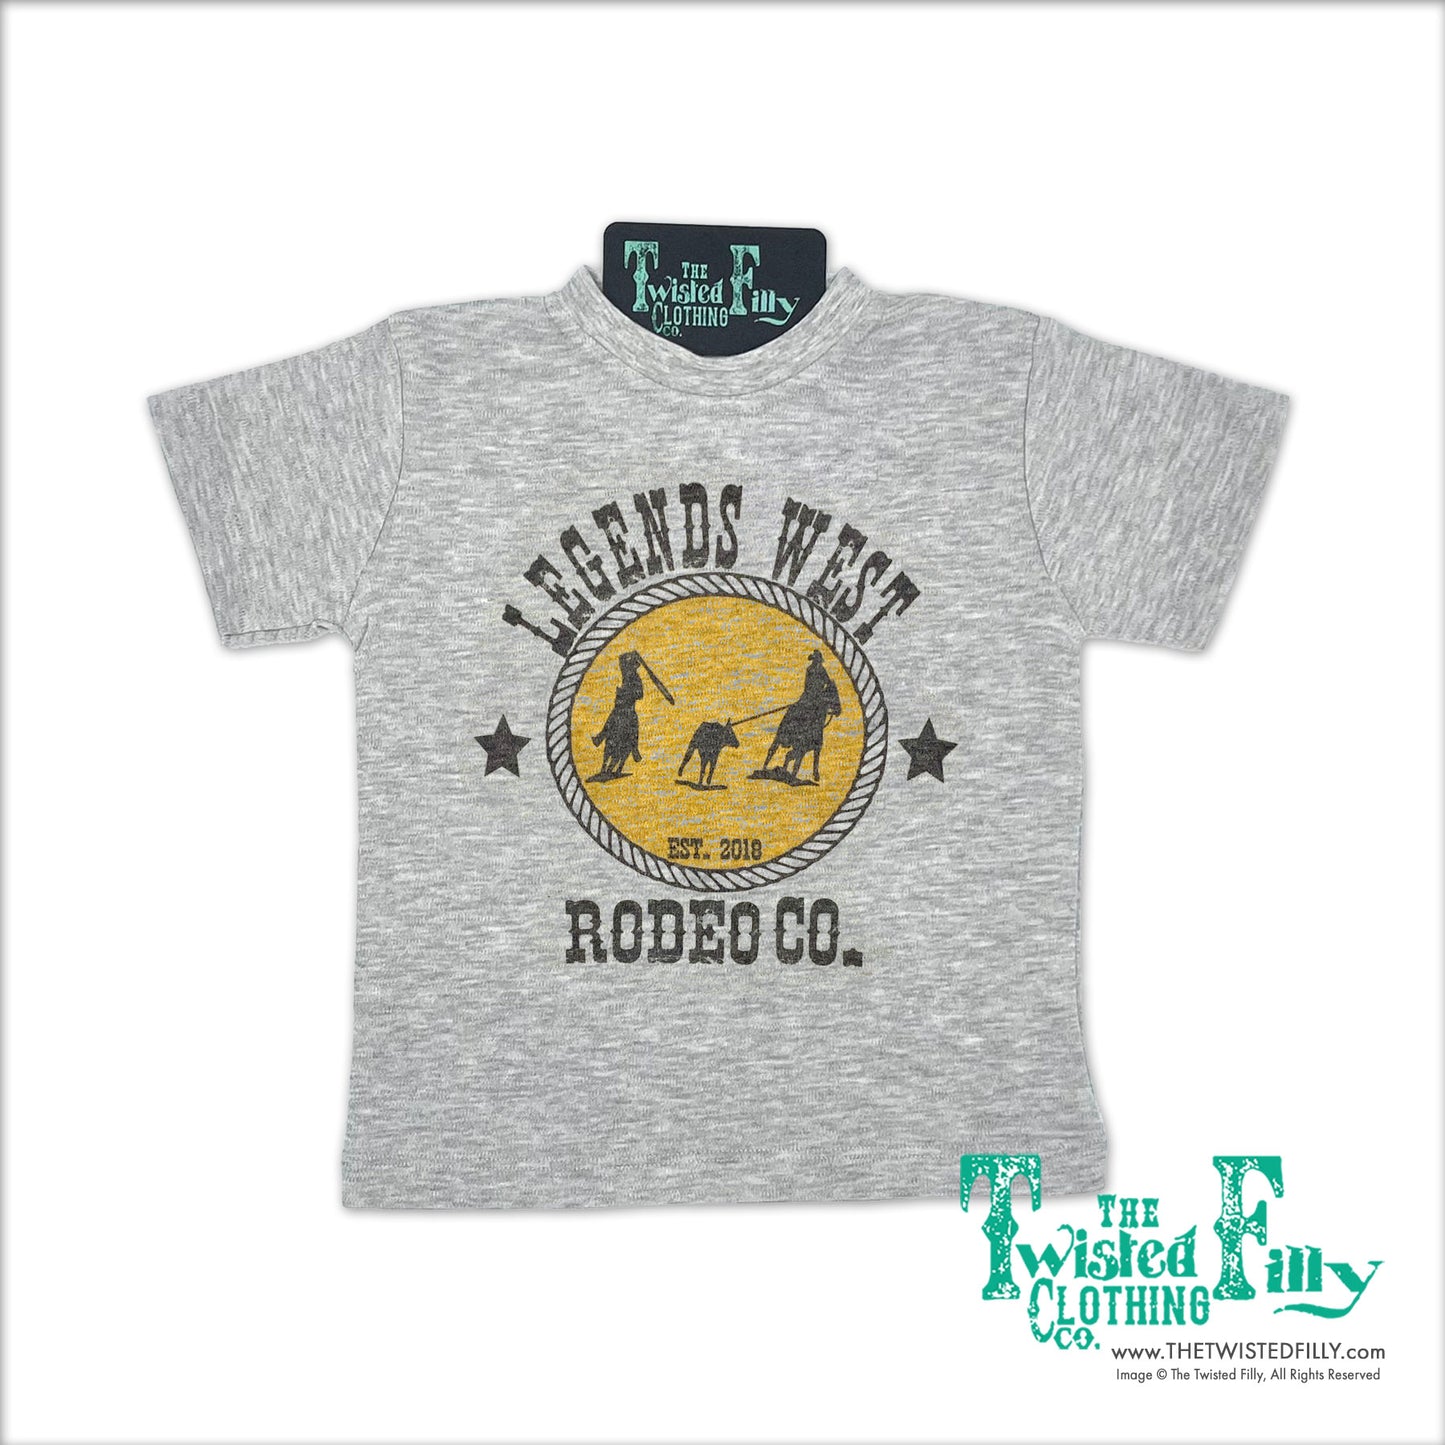 Legends West Rodeo Co. Team Roper - S/S Infant Tee - Gray